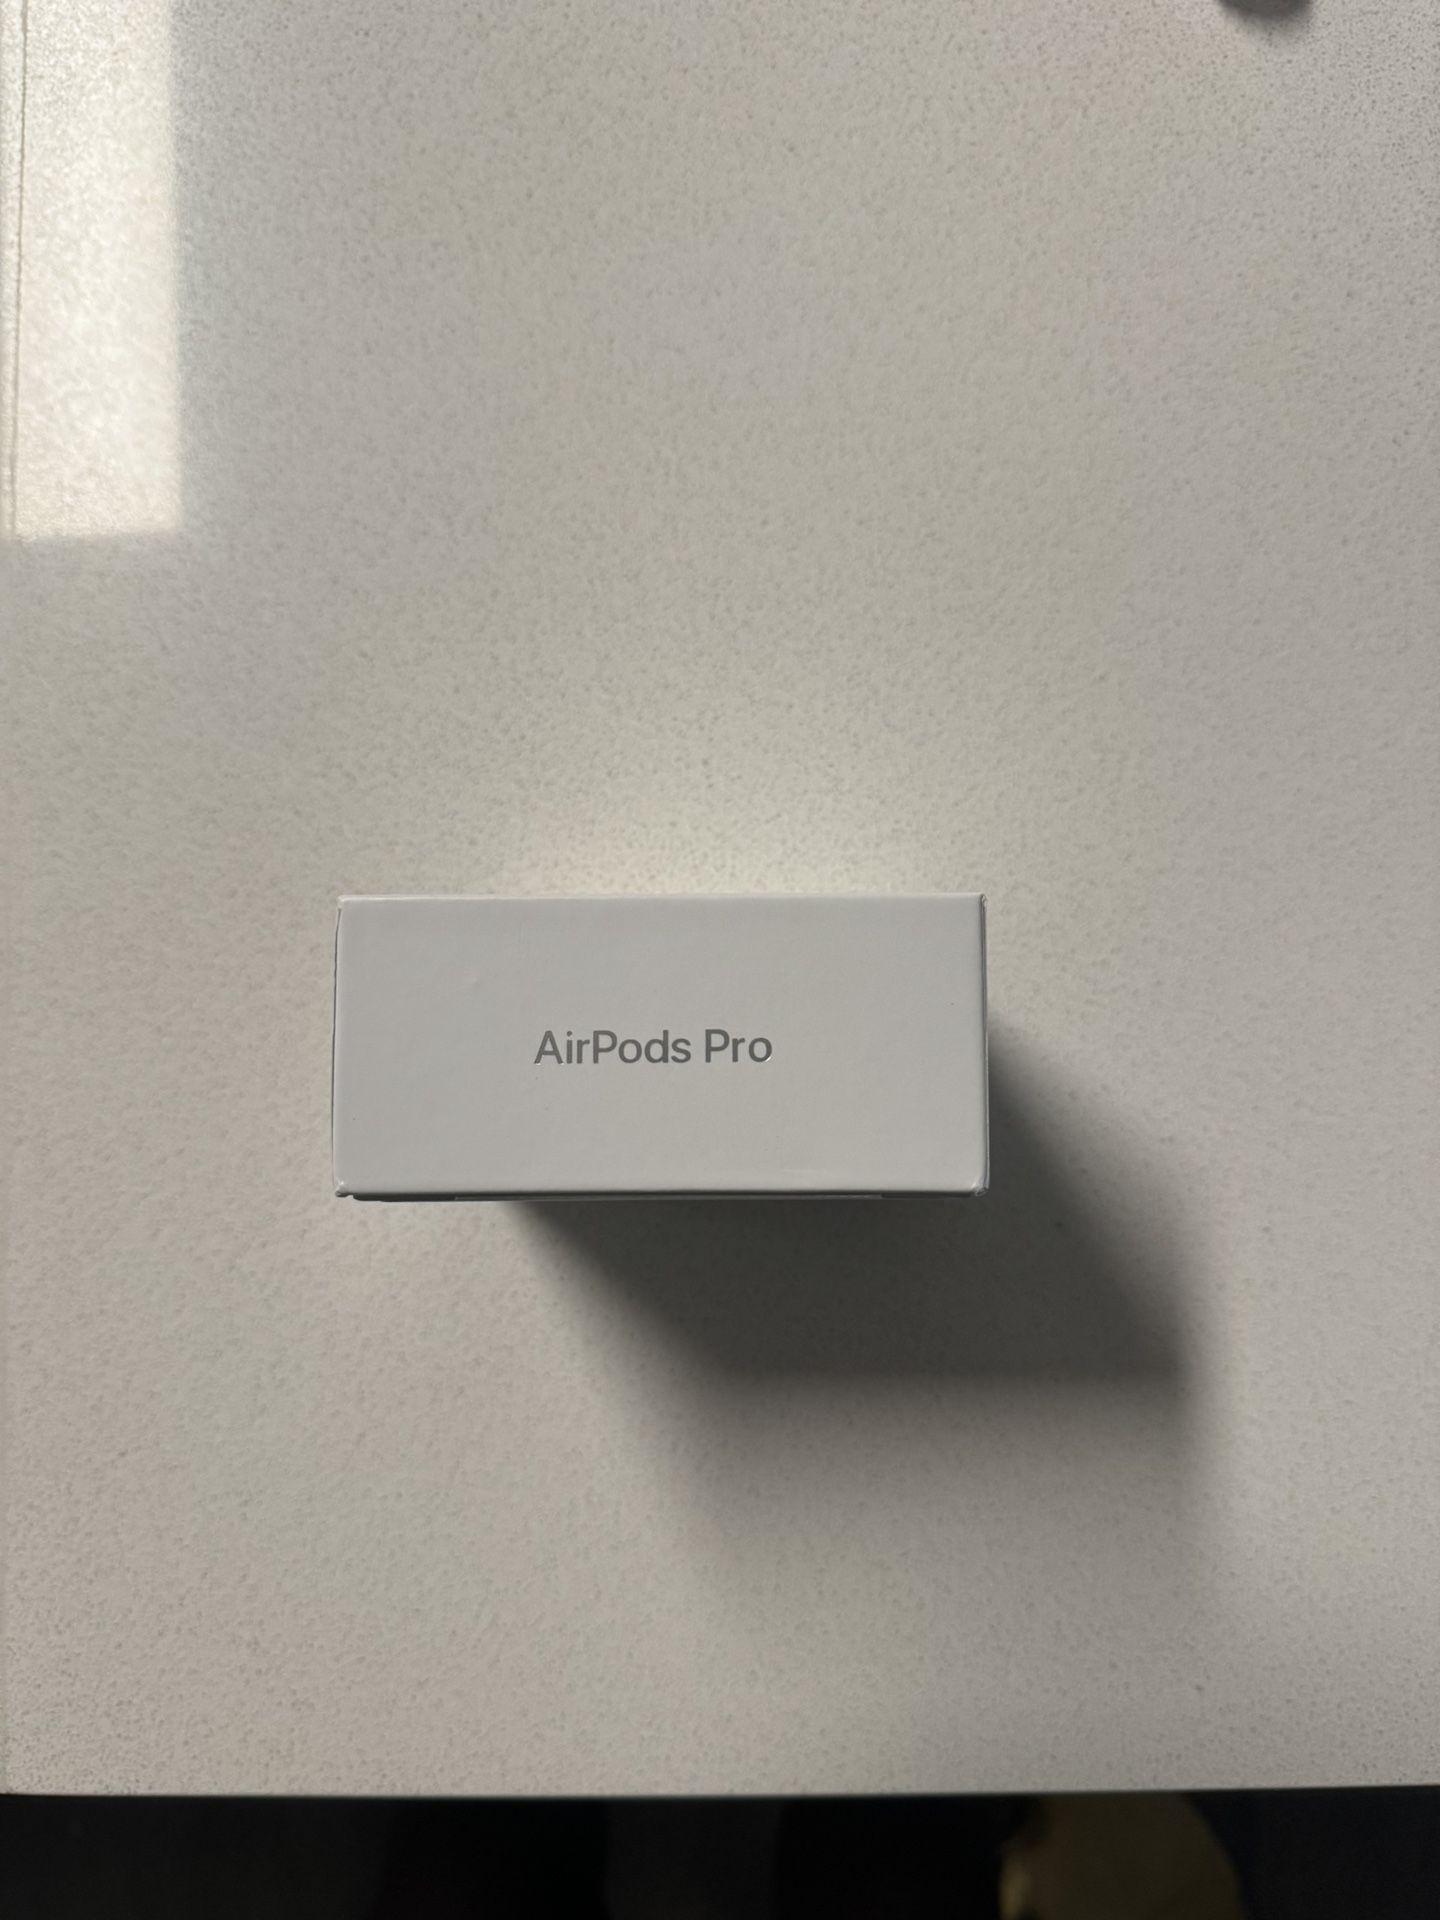 SEND BEST OFFER! AirPods Pro (SEALED IN THE BOX) 